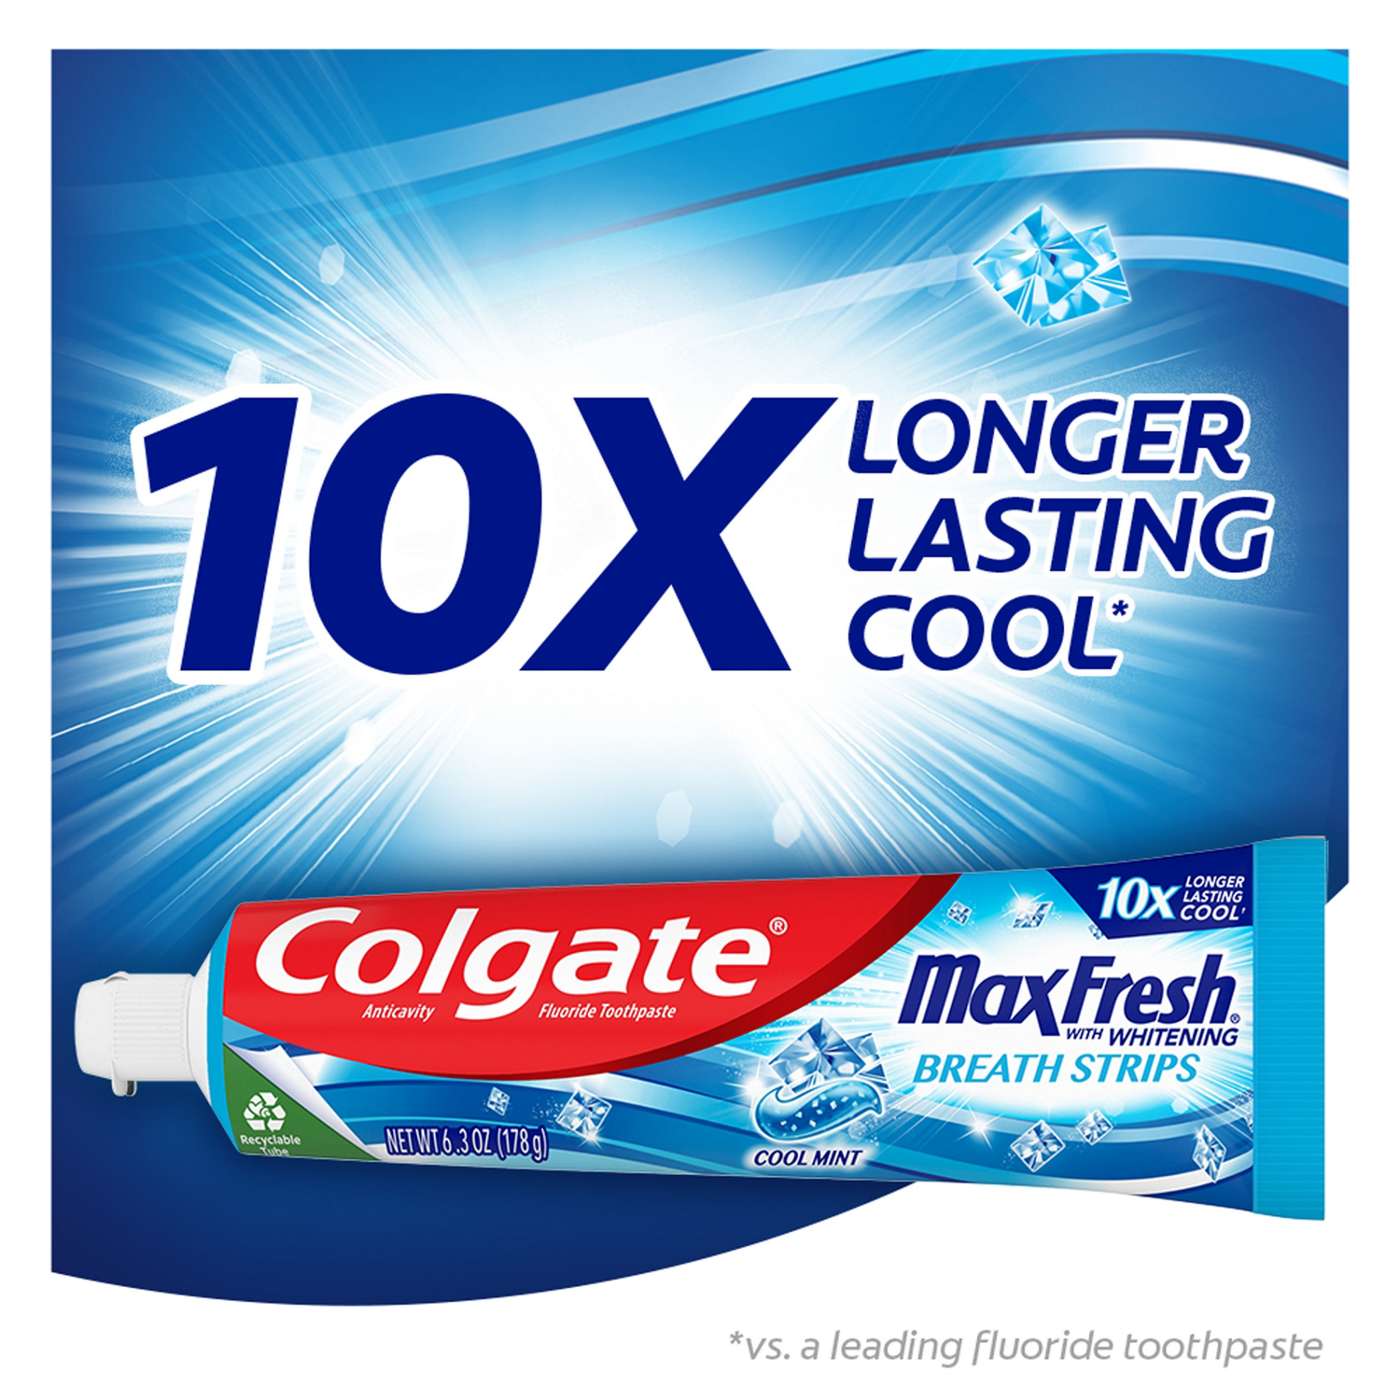 Colgate Max Fresh Whitening Anticavity Toothpaste - Cool Mint; image 2 of 2